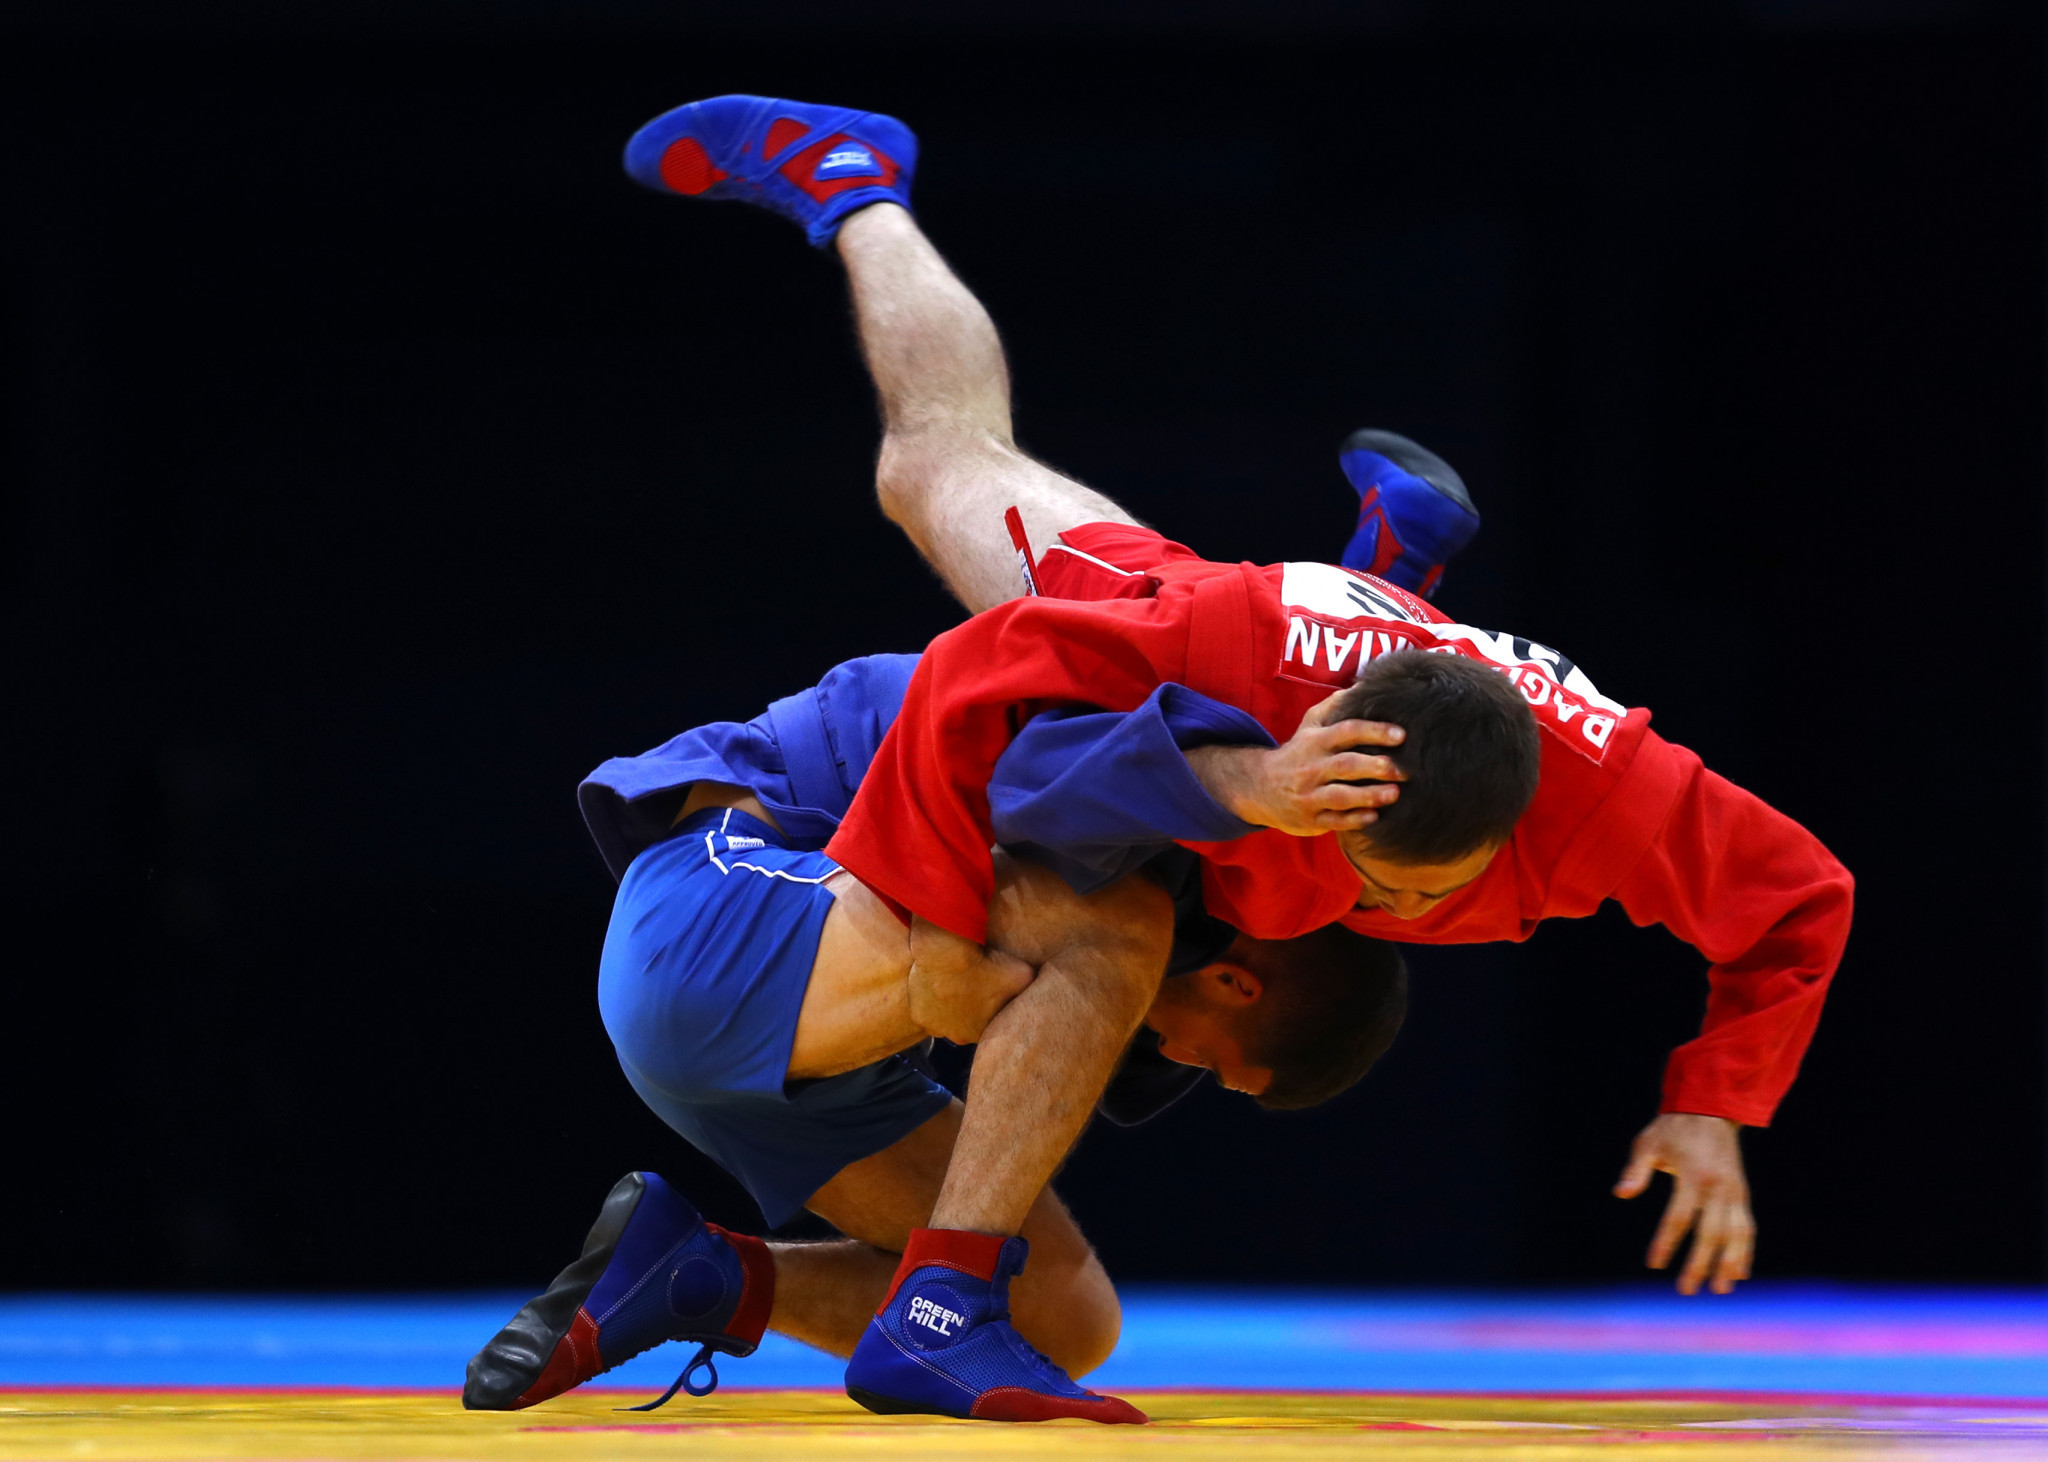 Exclusive sambo content will be available on the channel ©Getty Images